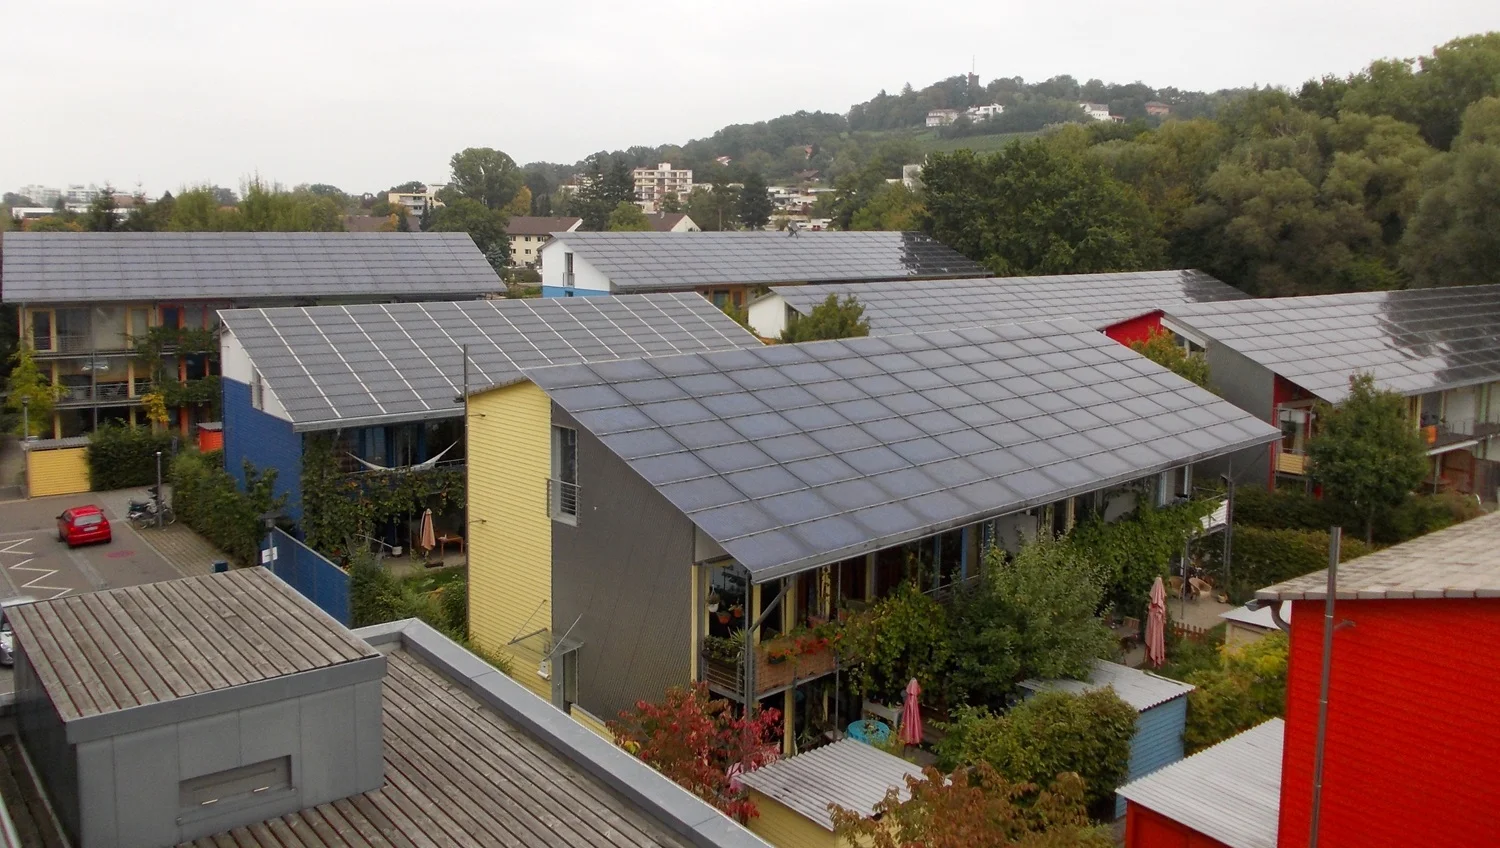 Energy-plus-houses at Freiburg-Vauban in Germany Sustainable Construction Guide